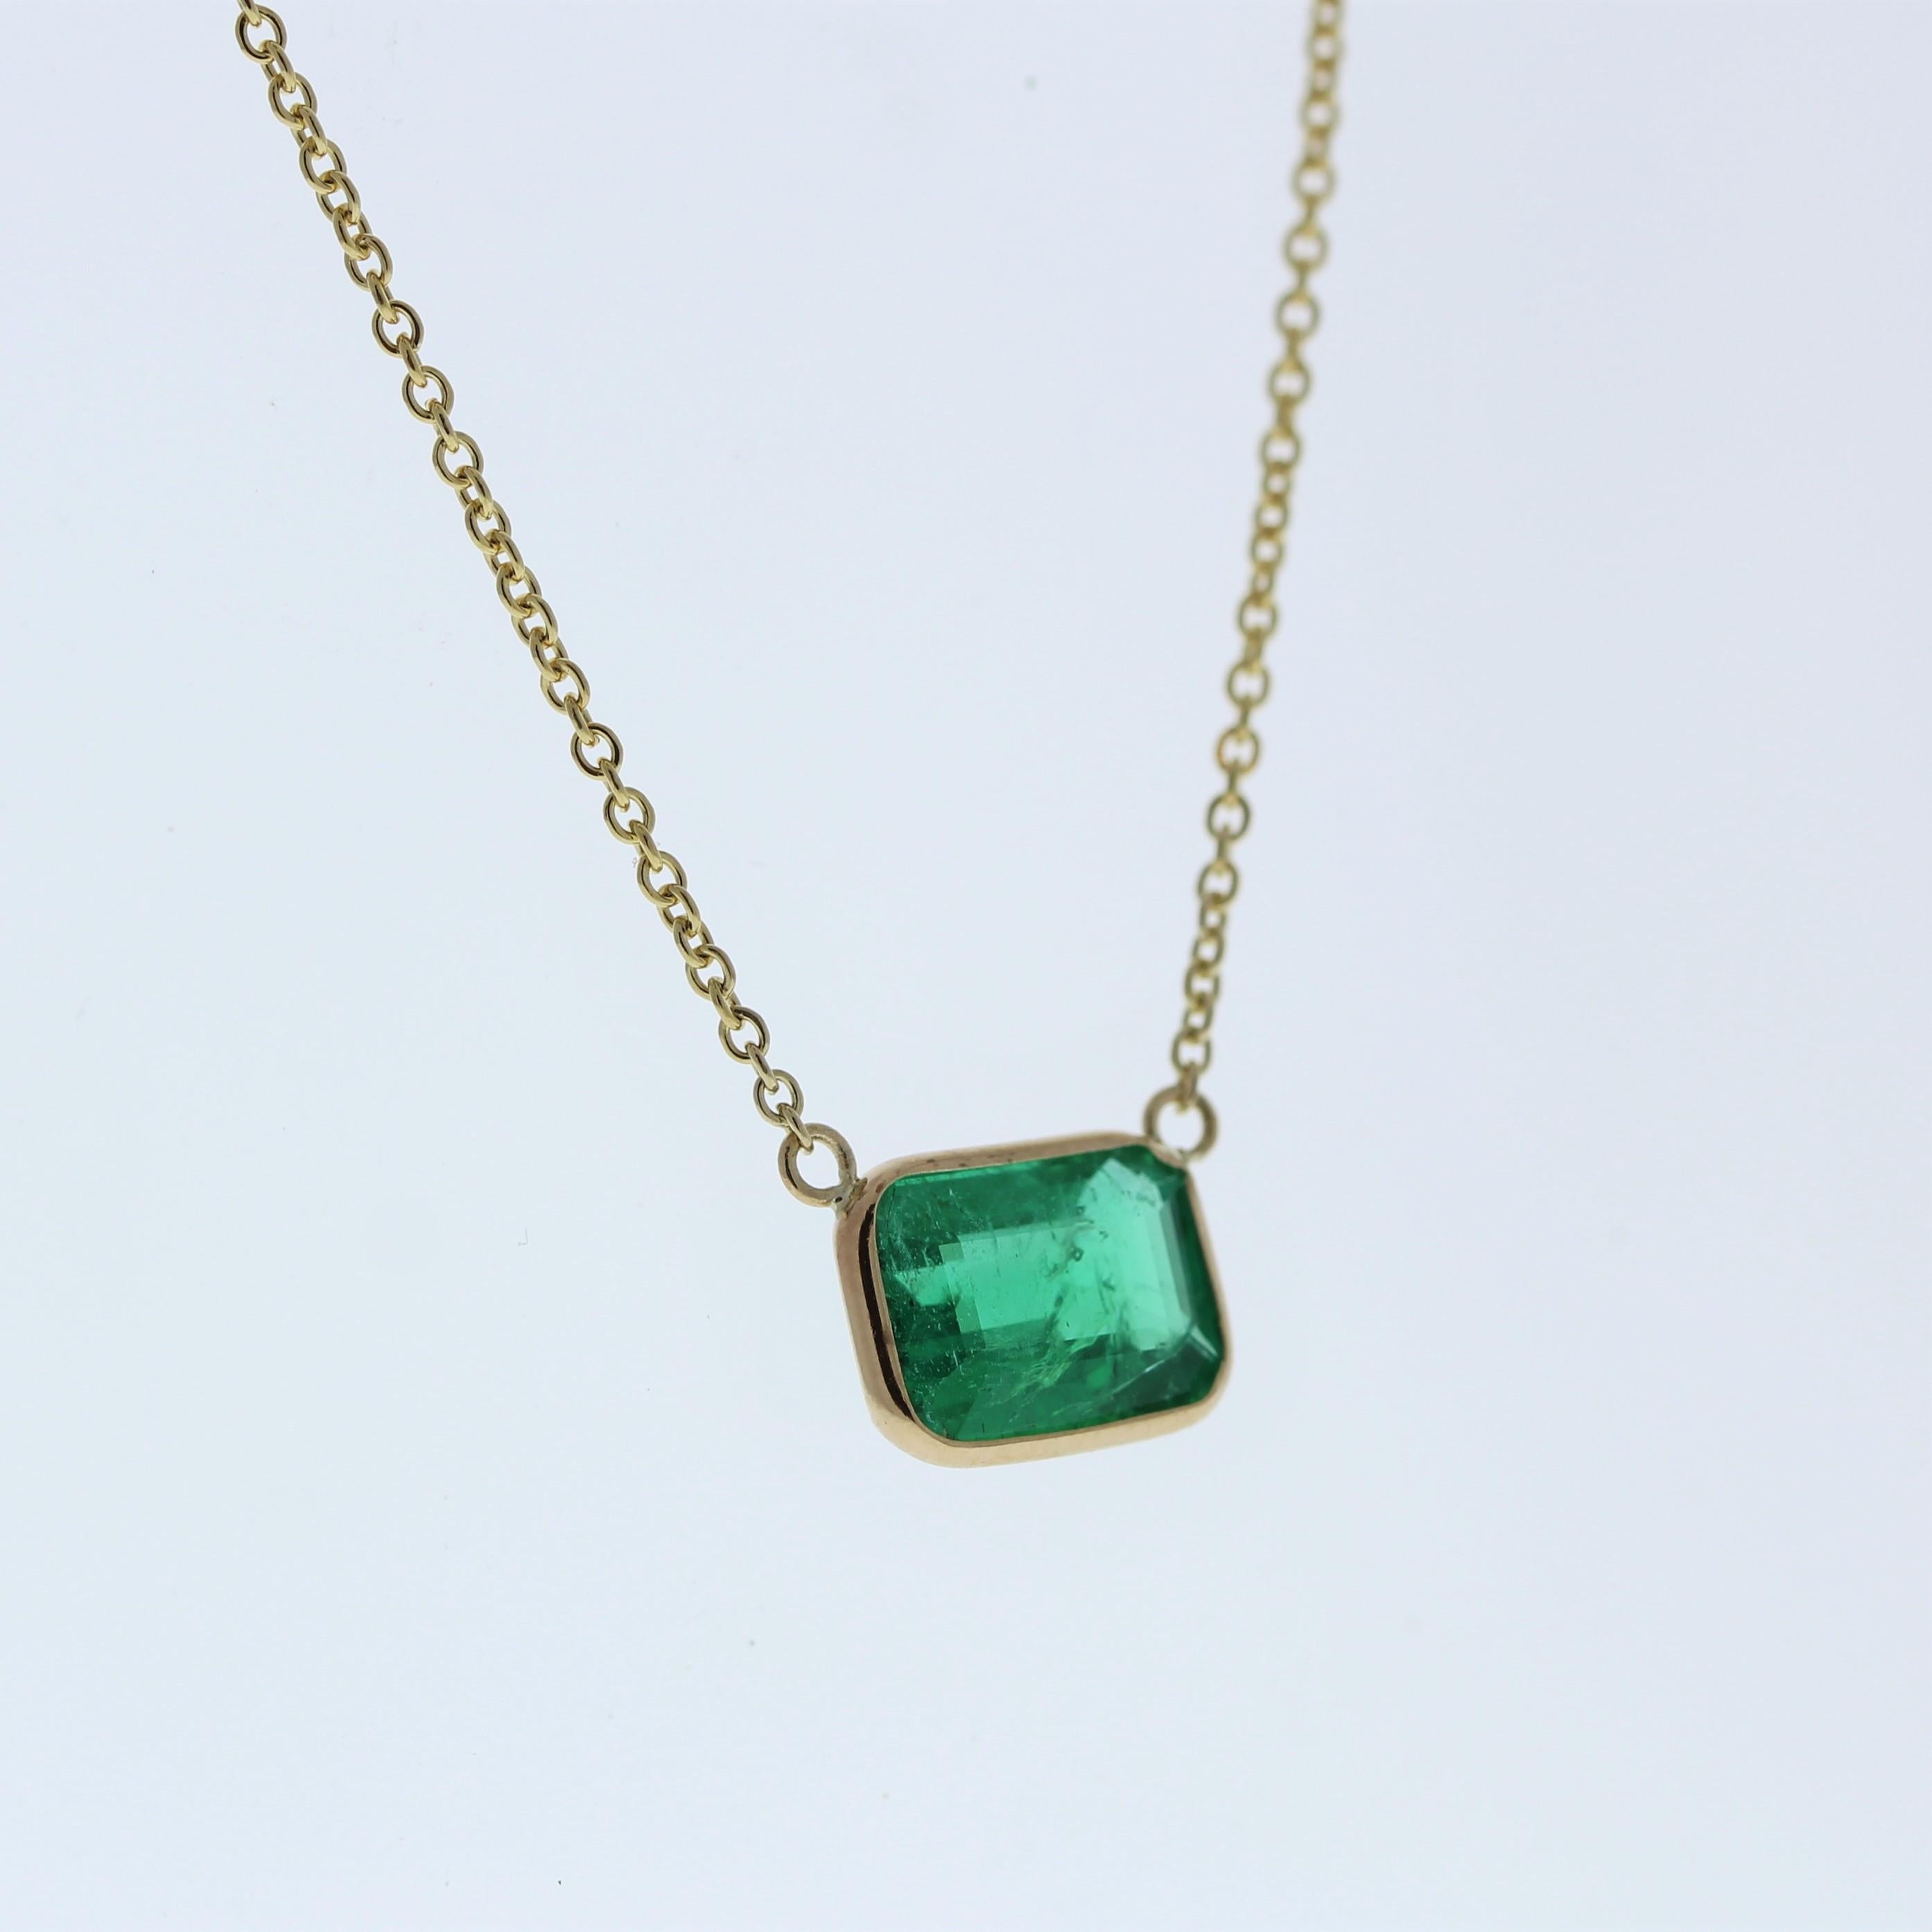 The necklace features a 2.00-carat emerald-cut emerald set in a 14 karat yellow gold pendant or setting. The emerald cut and the lush green color of the emerald against the yellow gold setting are likely to create an elegant and eye-catching fashion